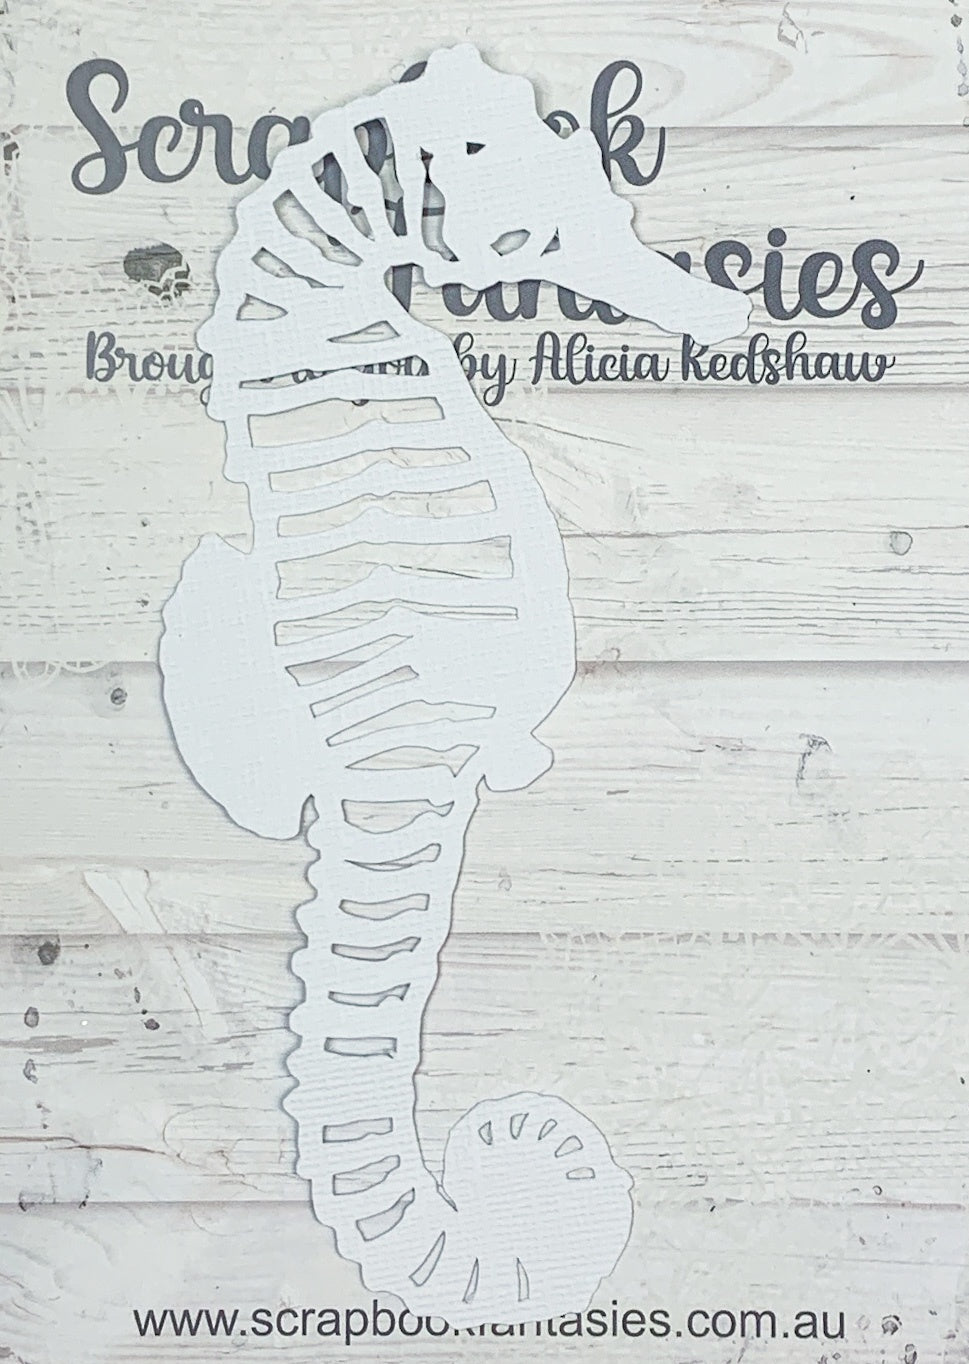 the islands Seahorse 6"x3" White Linen Cardstock Picture-Cut - Designed by Alicia Redshaw